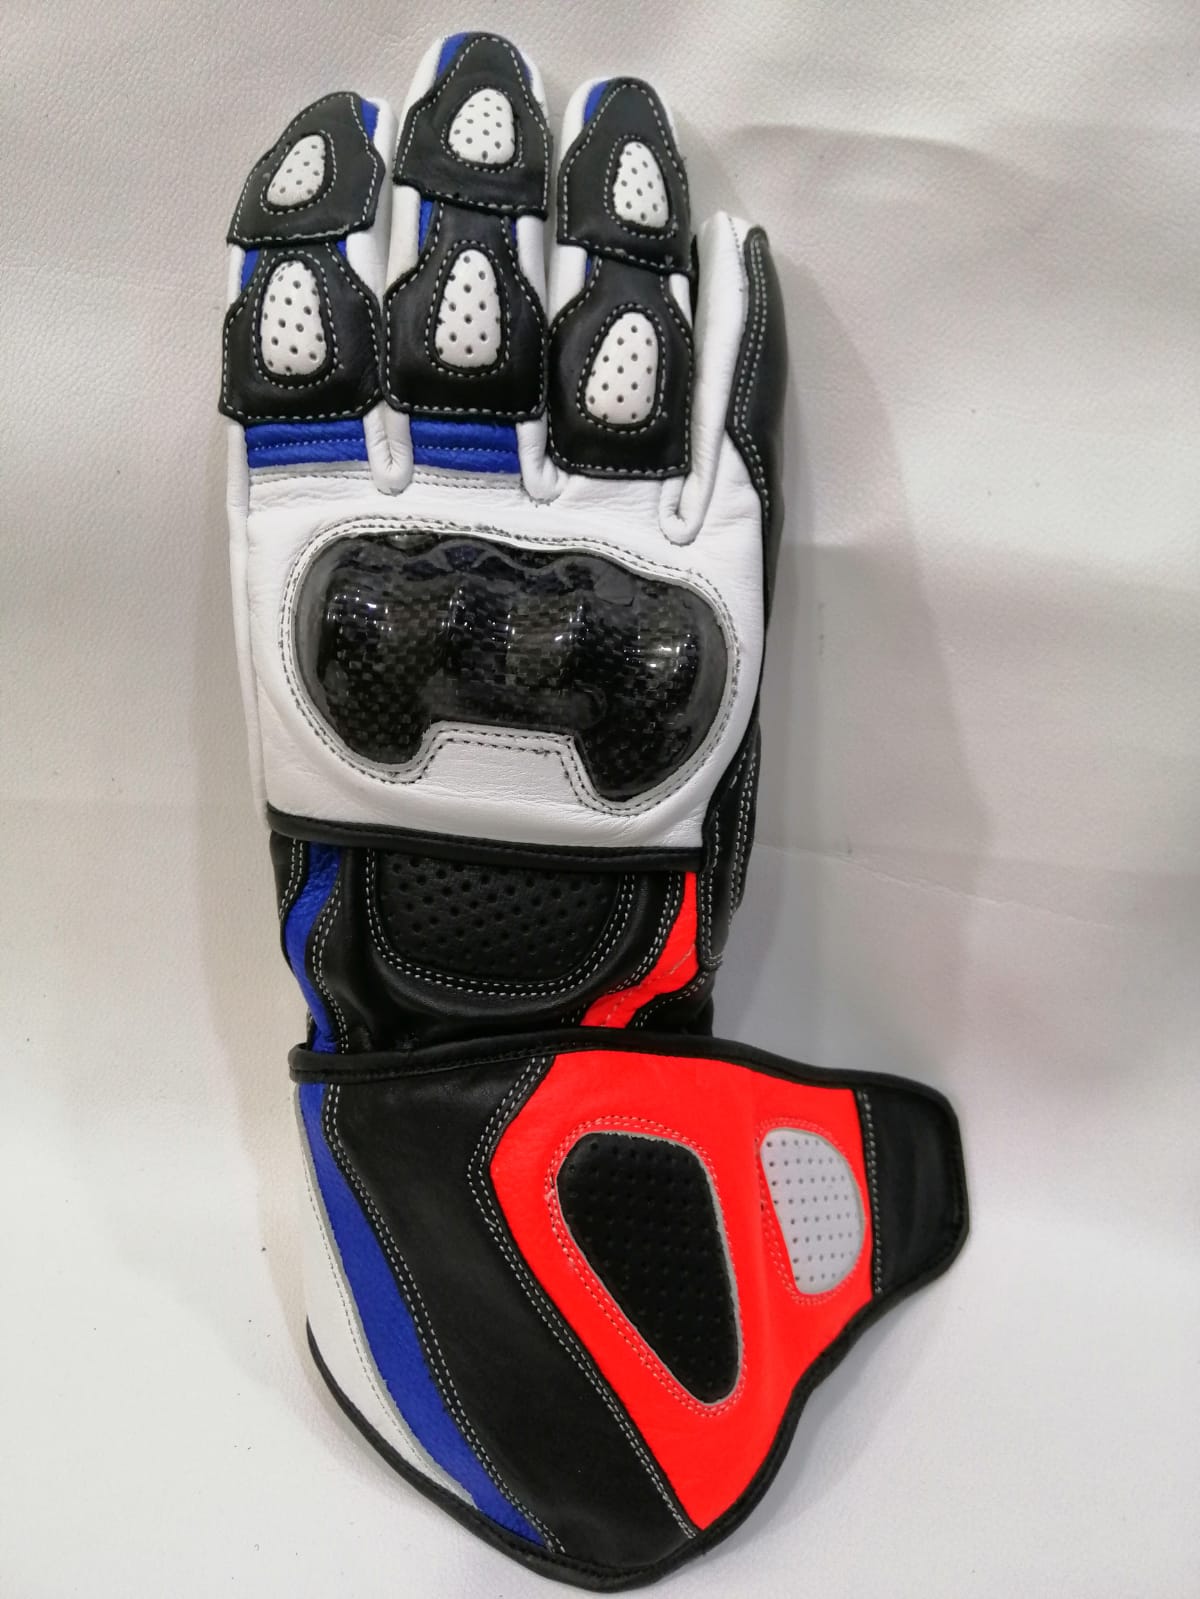 Motorcycle Racing Gloves Custom Design Leather Protective Bike Riding Gloves - Unisex